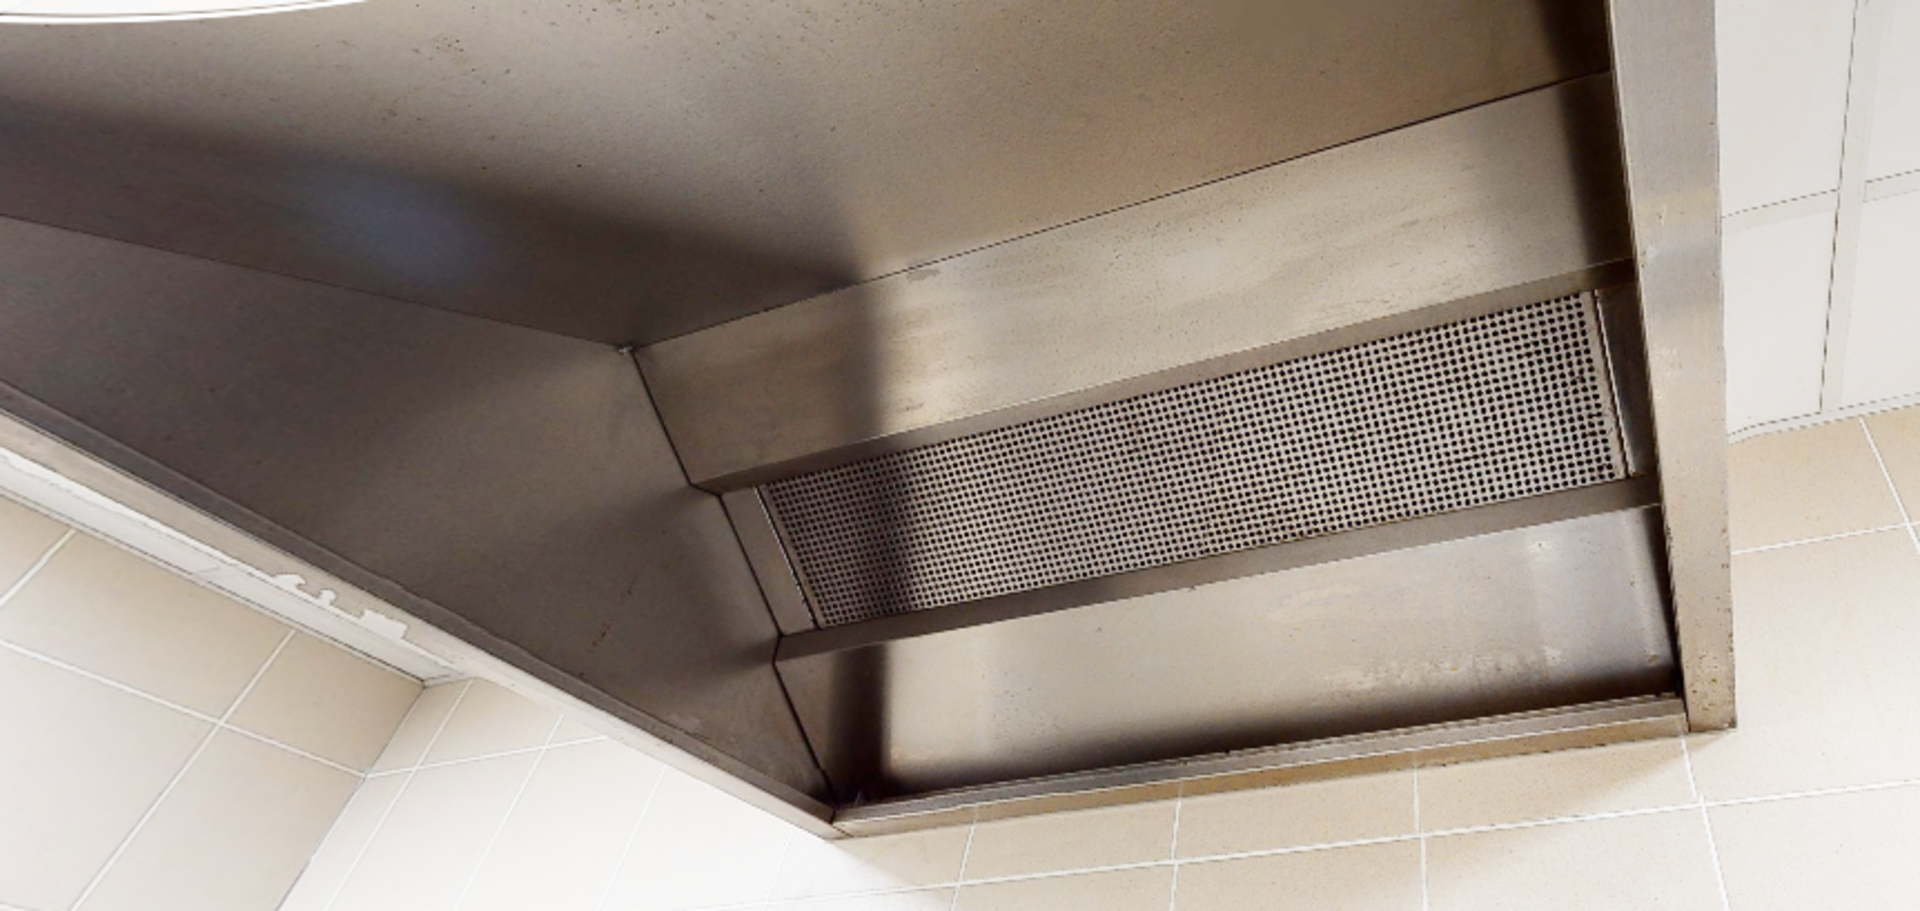 1 x Commercial Stainless Steel Extraction Canopy - CL701 - Location: Ashton Moss, Manchester, OL7 - Image 8 of 8